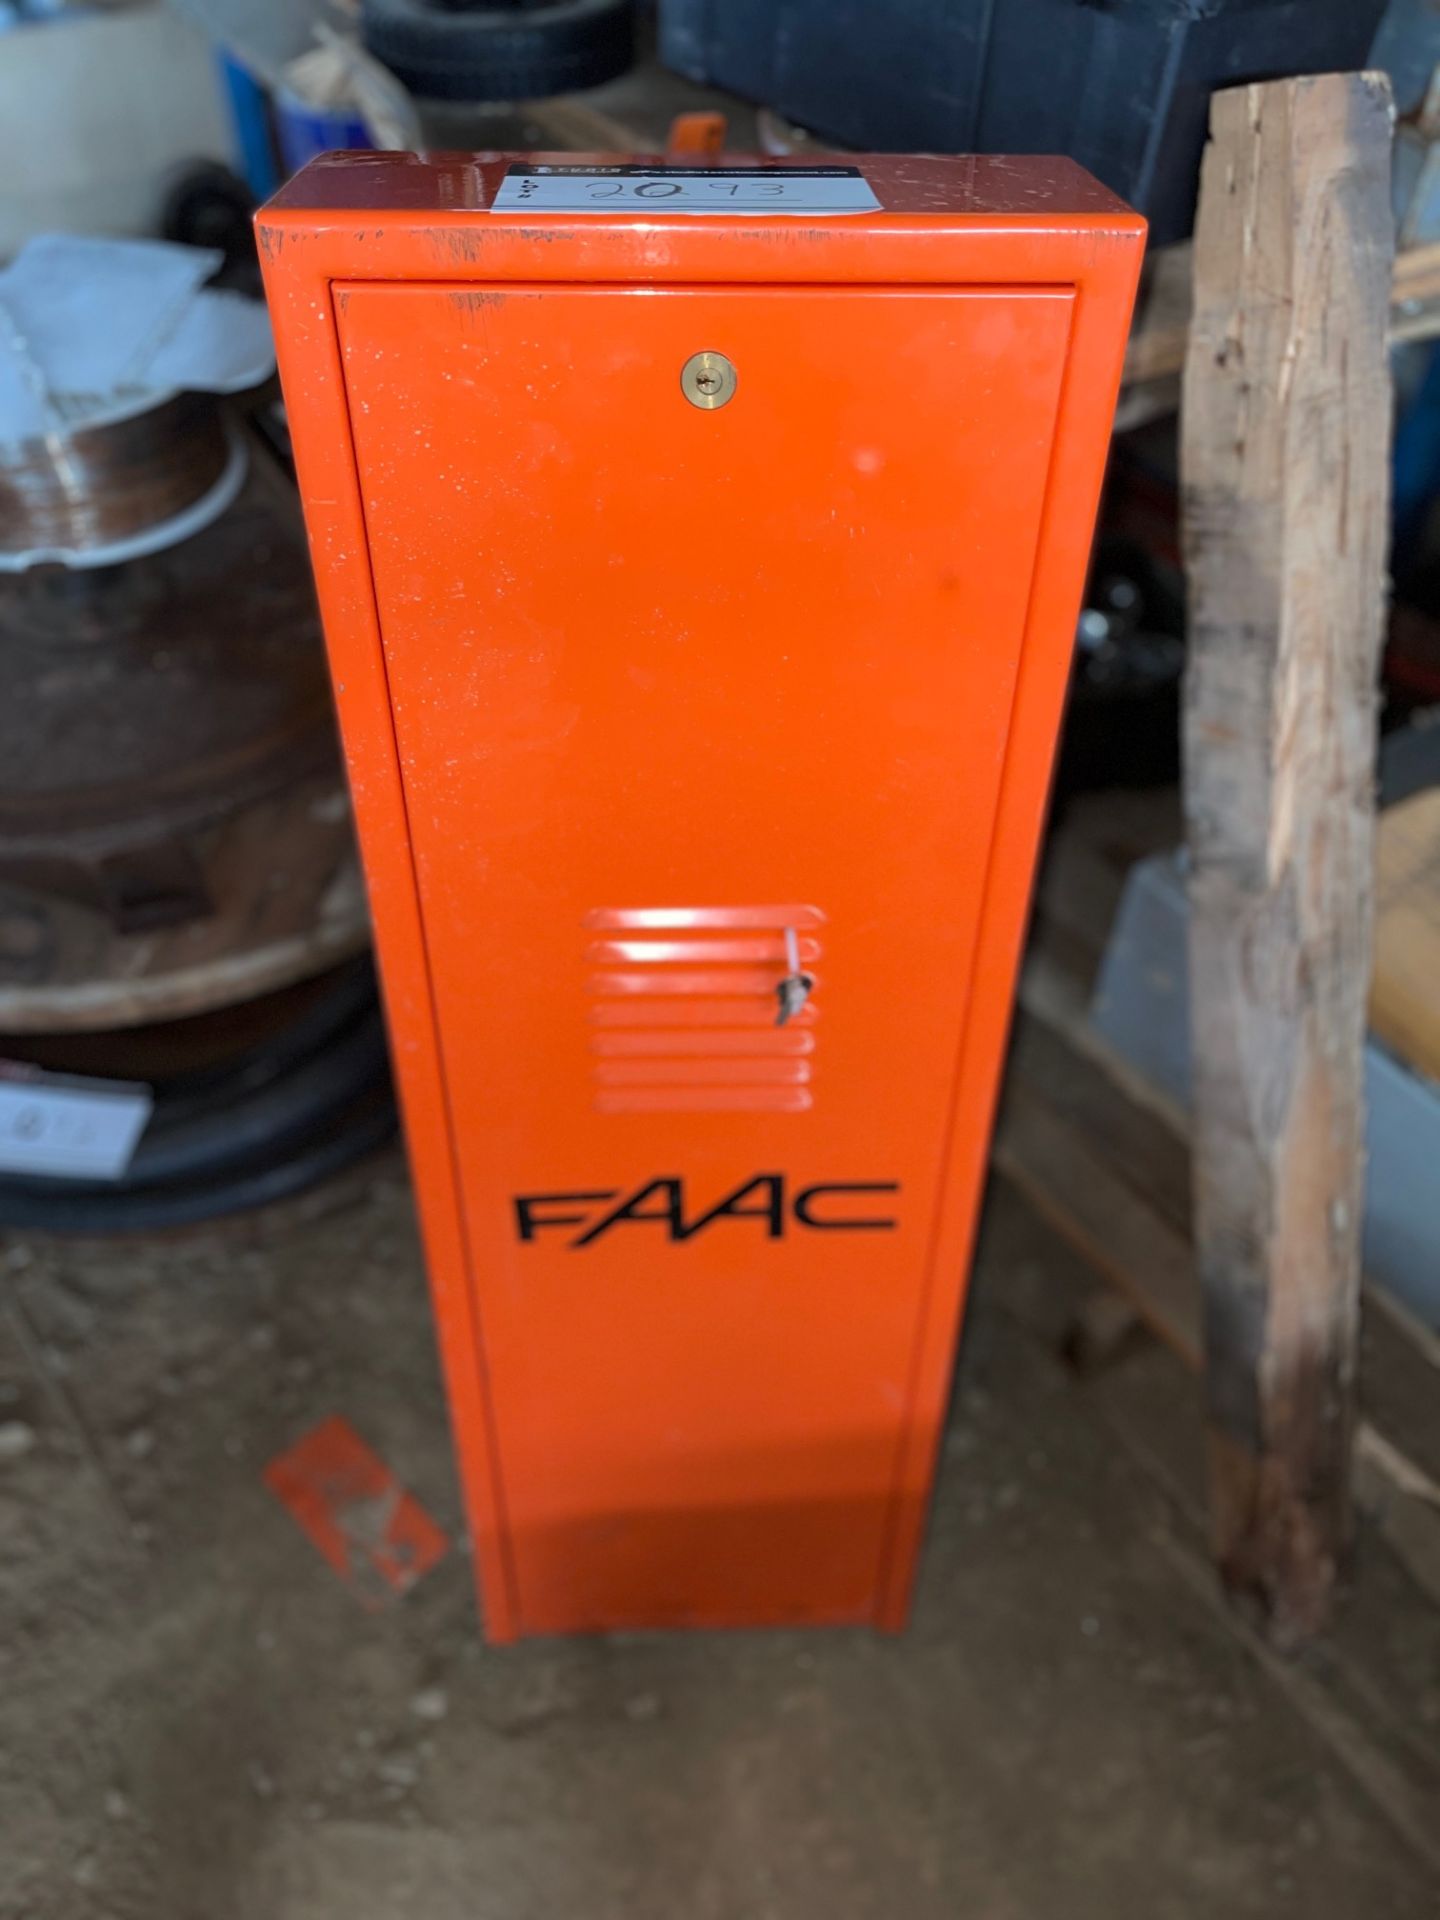 FAAC, POWER LIFTGATE ARM POWER PACK, PARKING LOT, 115 V NEW, RIGGING FEE $